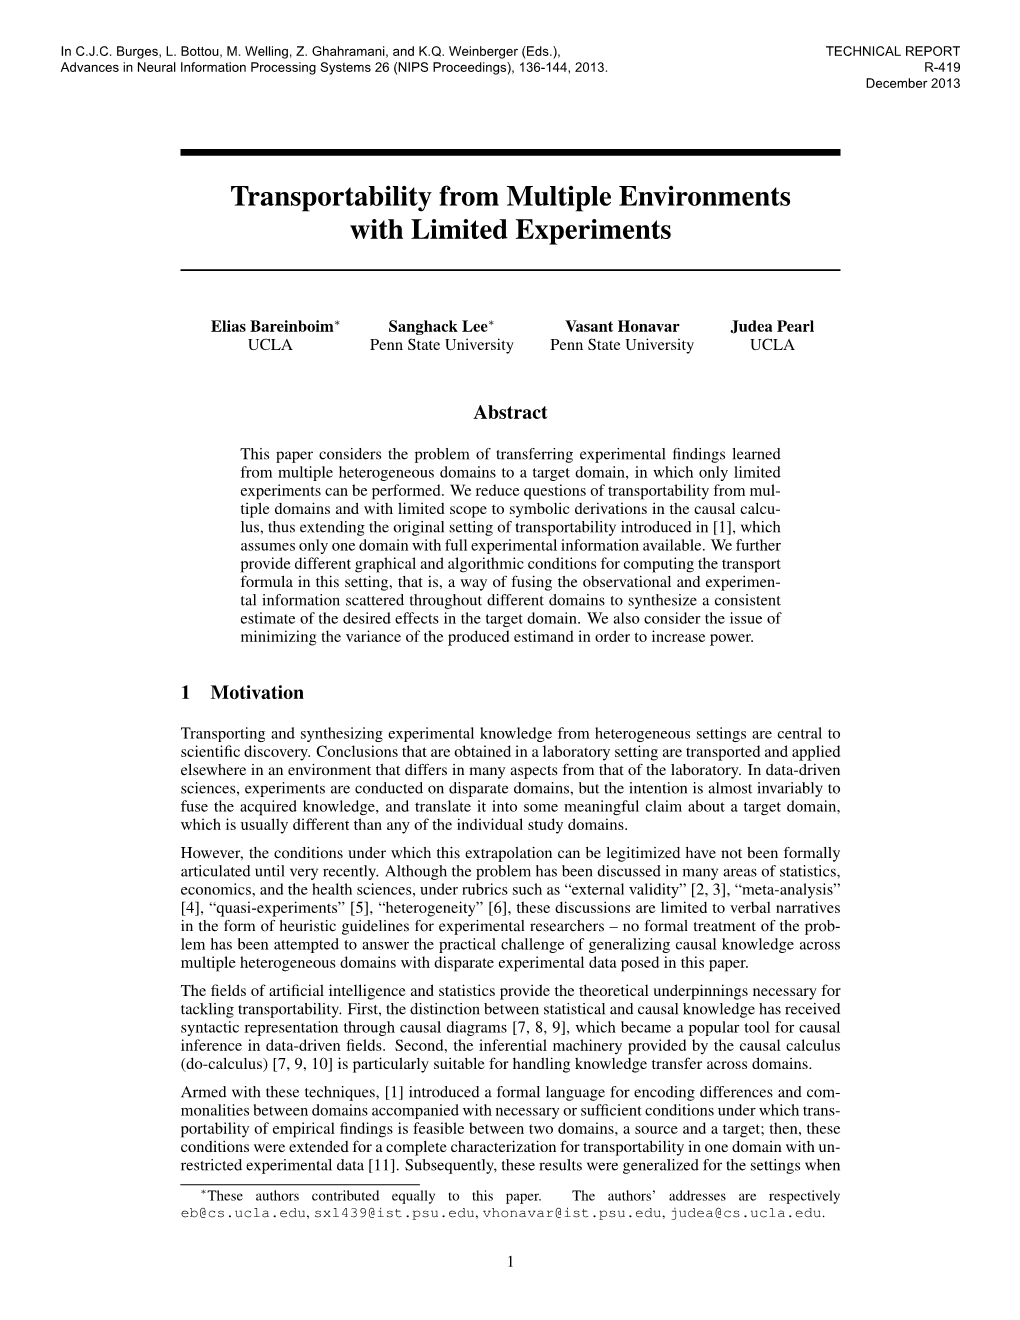 Transportability from Multiple Environments with Limited Experiments